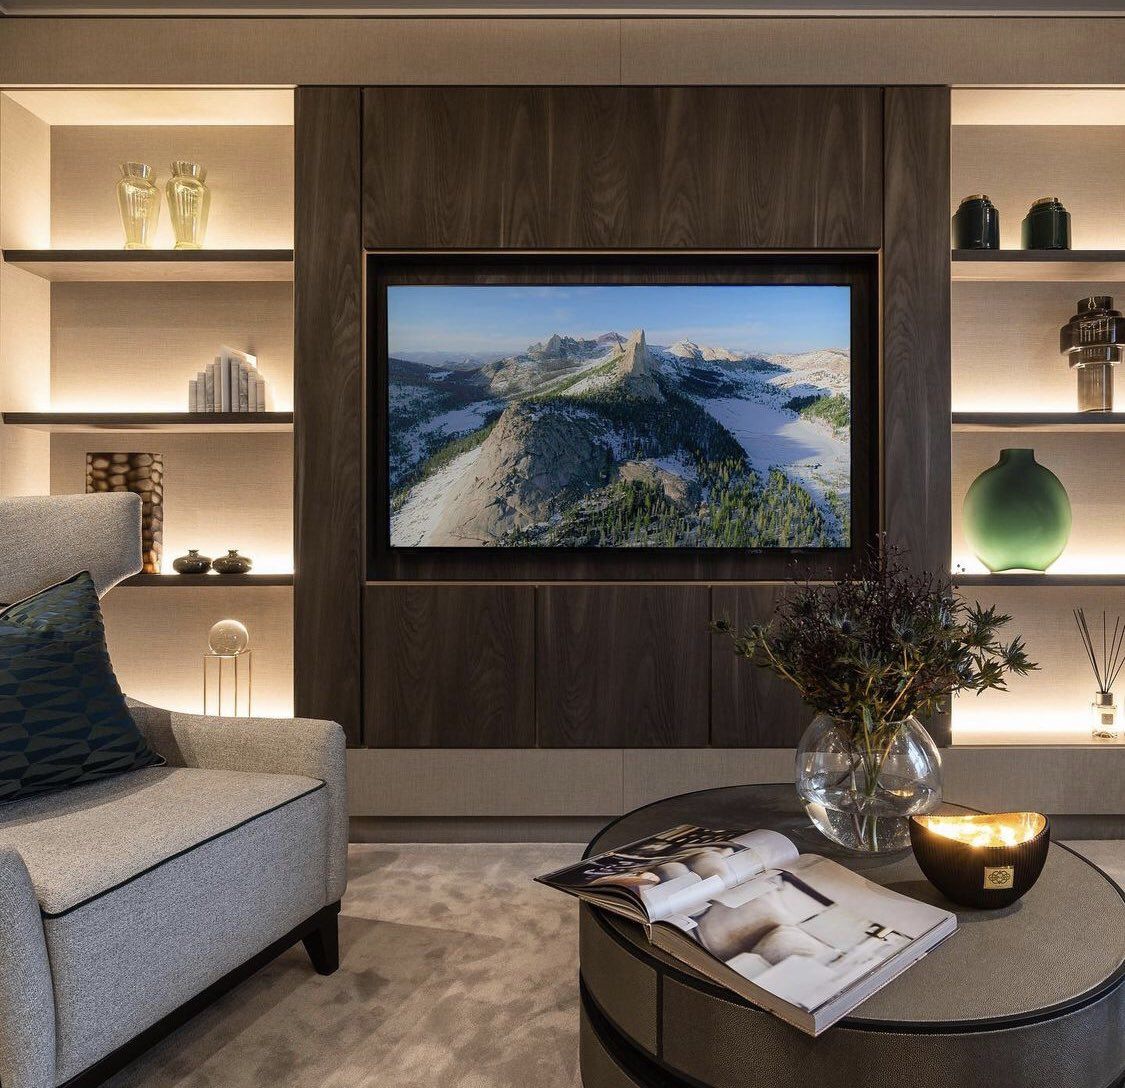 Showcase Your Style: TV Showcase Designs for Living Rooms